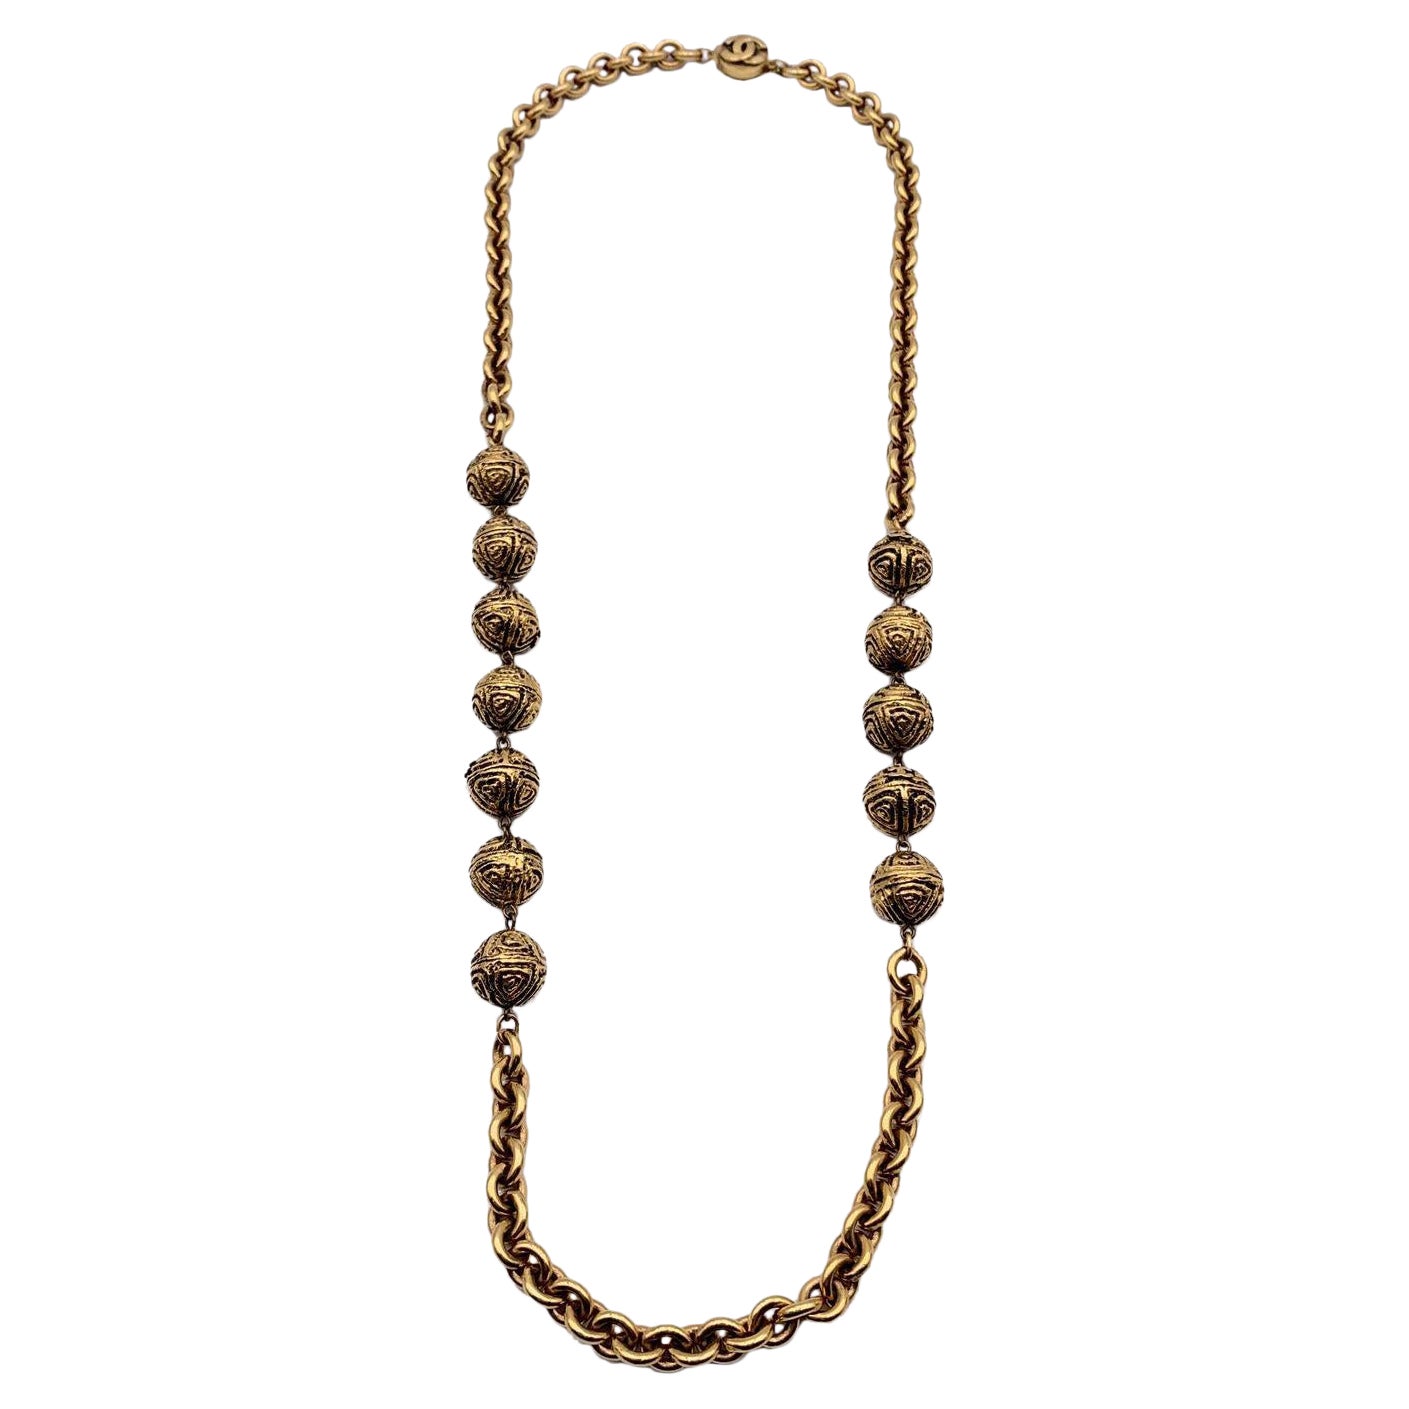 Chanel Vintage 1980s Gold Metal Chain Necklace with Metal Beads